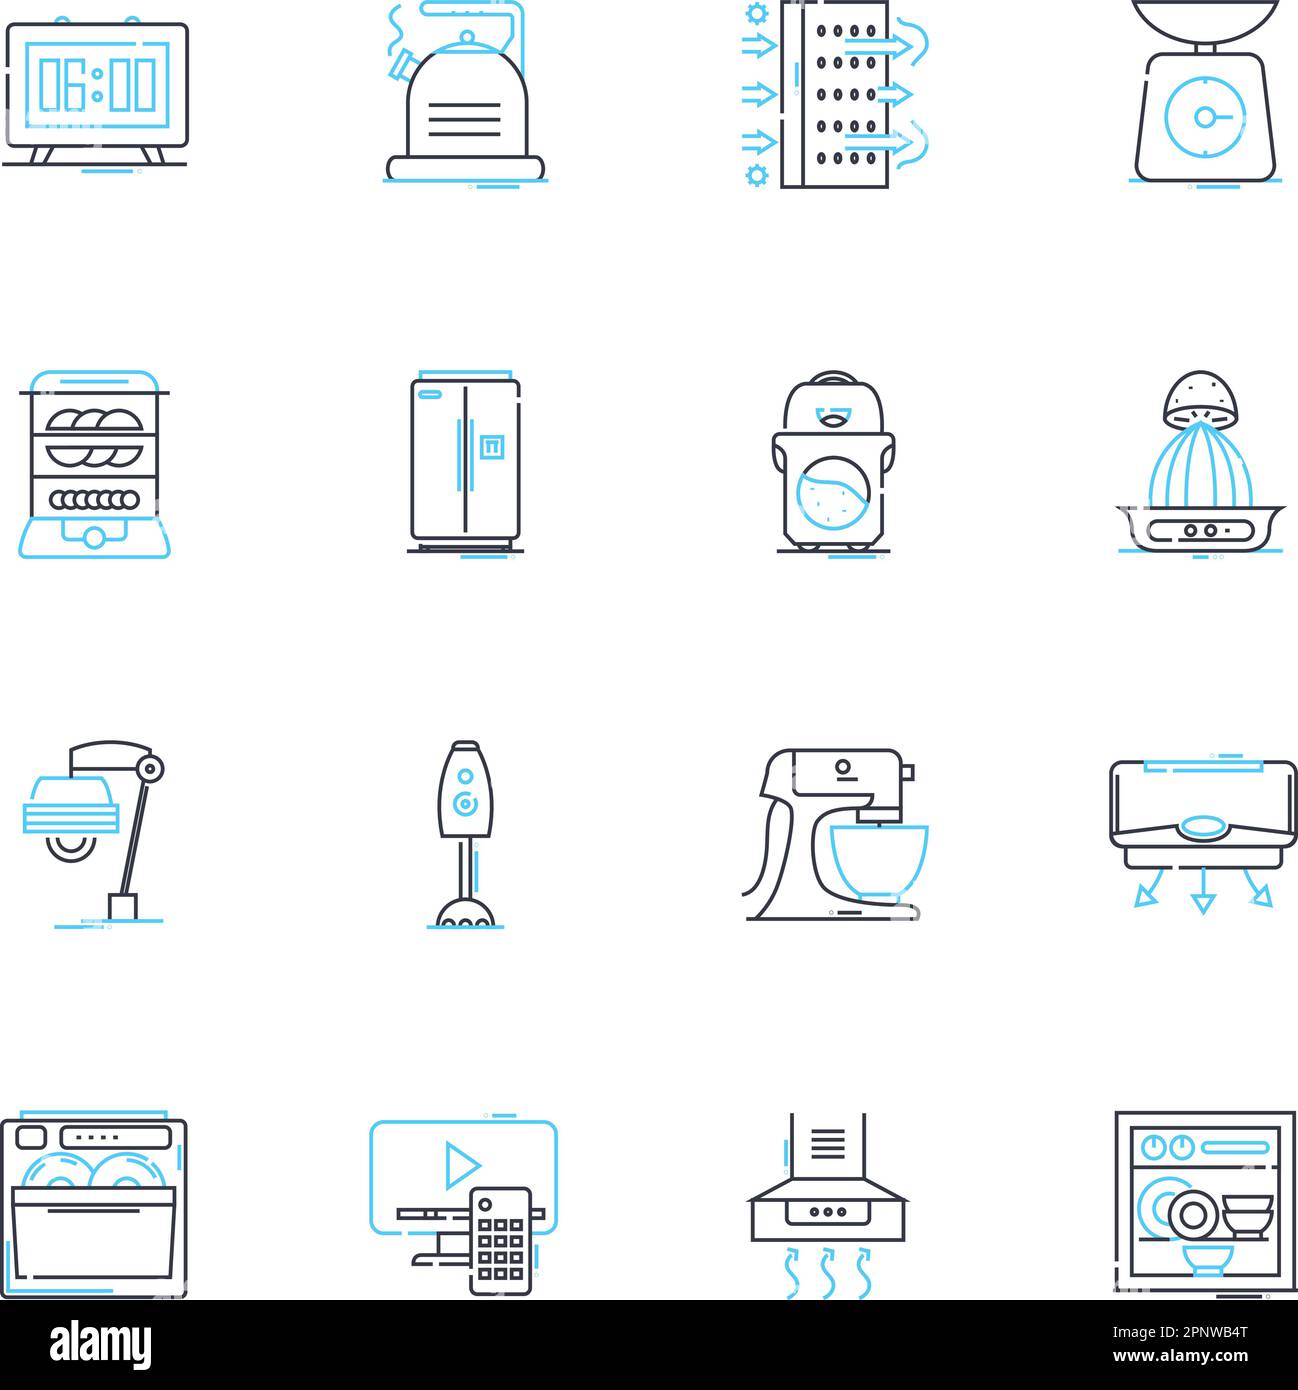 Fixtures linear icons set. Lighting, Plumbing, Hardware, Fittings, Appliances, Faucets, Showerheads line vector and concept signs. Bathtubs,Sinks Stock Vector